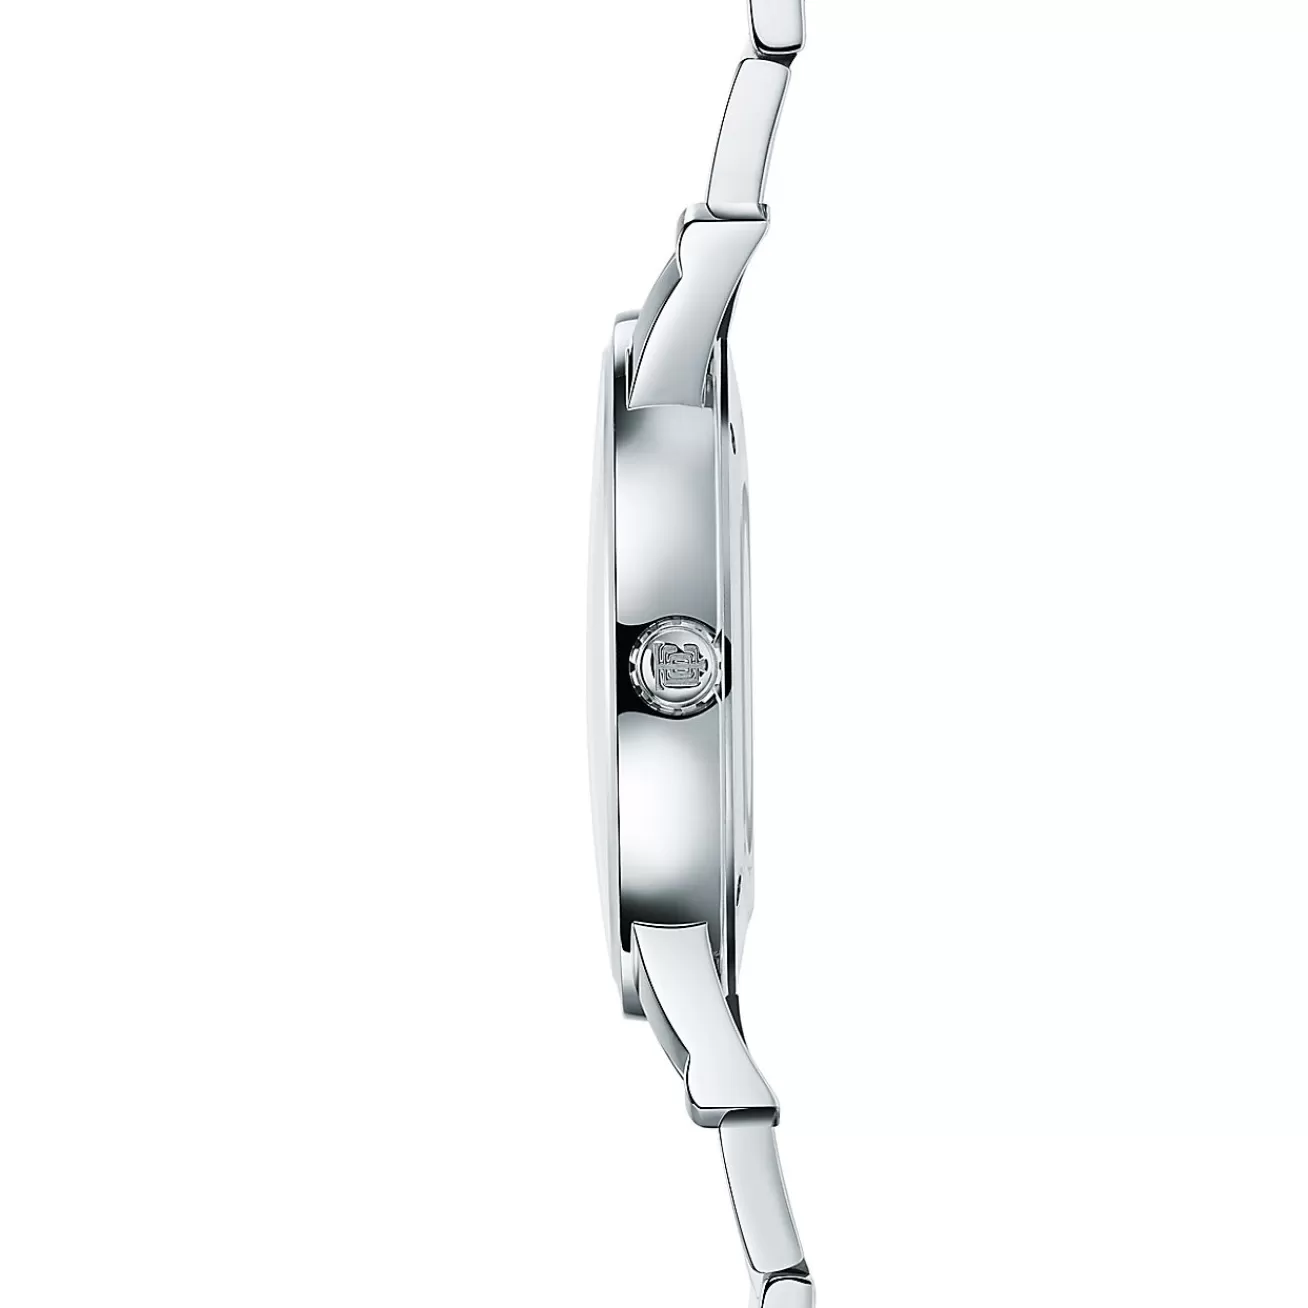 Tiffany & Co. Atlas® 2-Hand 37.5 mm men's watch in stainless steel. | ^ Fine Watches | Men’s Watches